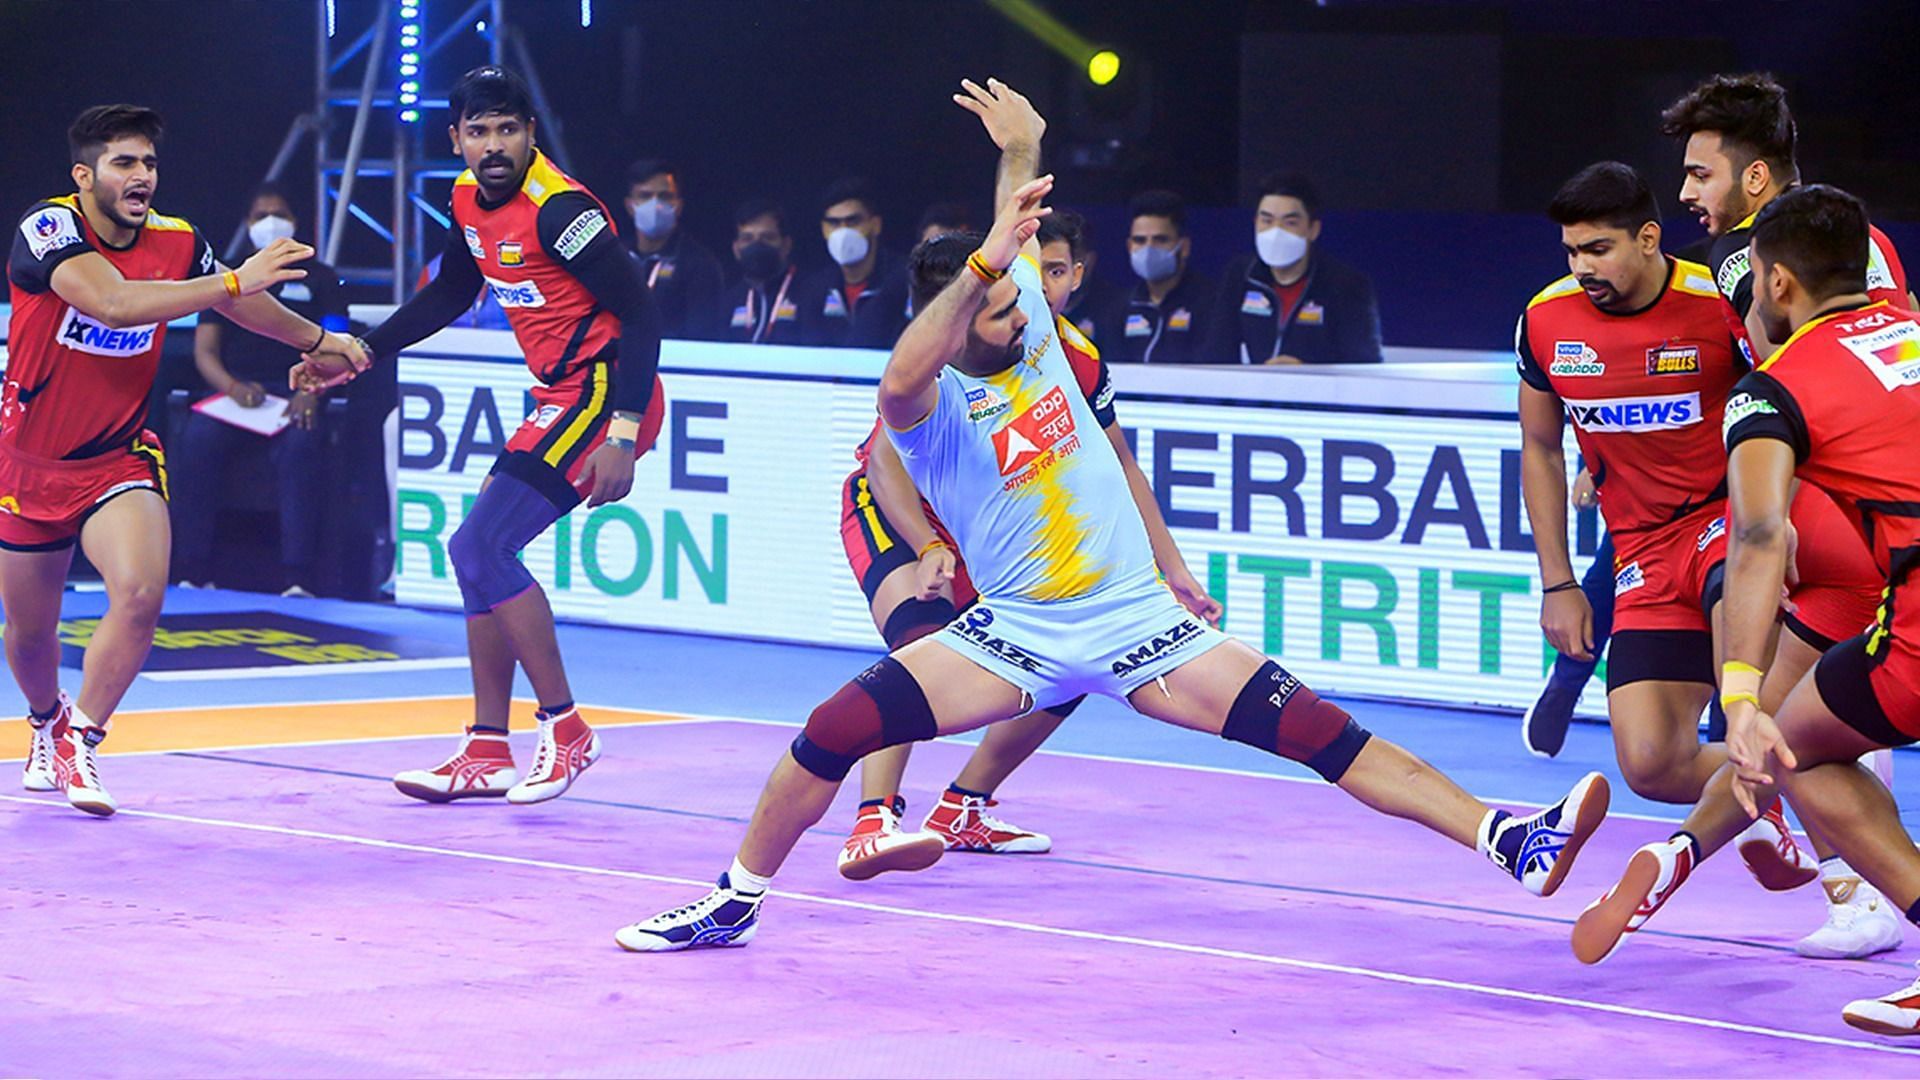 Pardeep Narwal did not score a single point for UP Yoddha against Bengaluru Bulls (Image: Pro Kabaddi/Facebook)